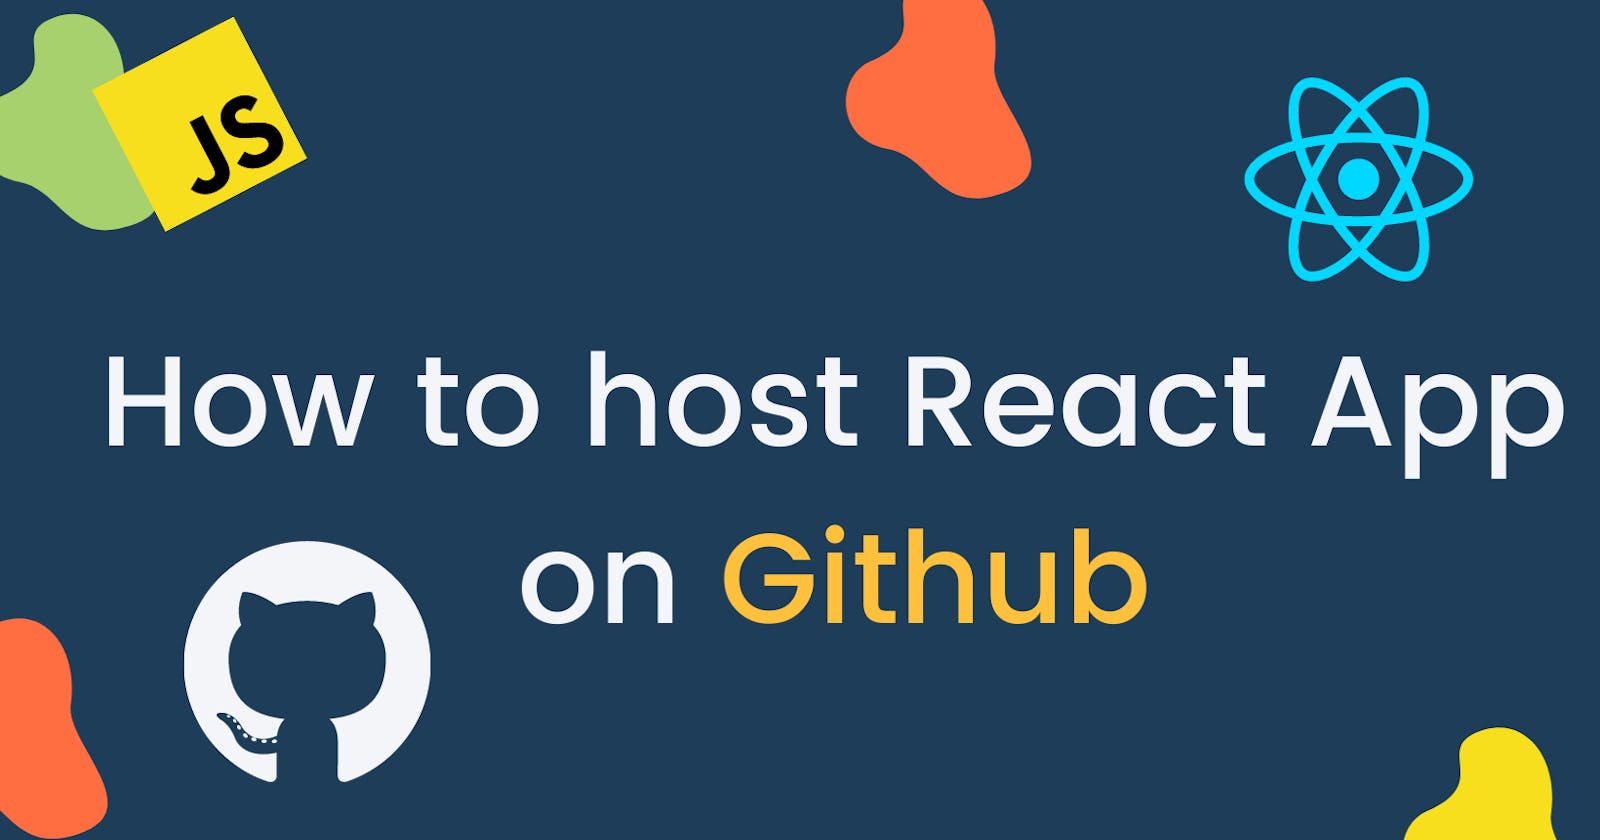 How to host your React App on Github 🚀